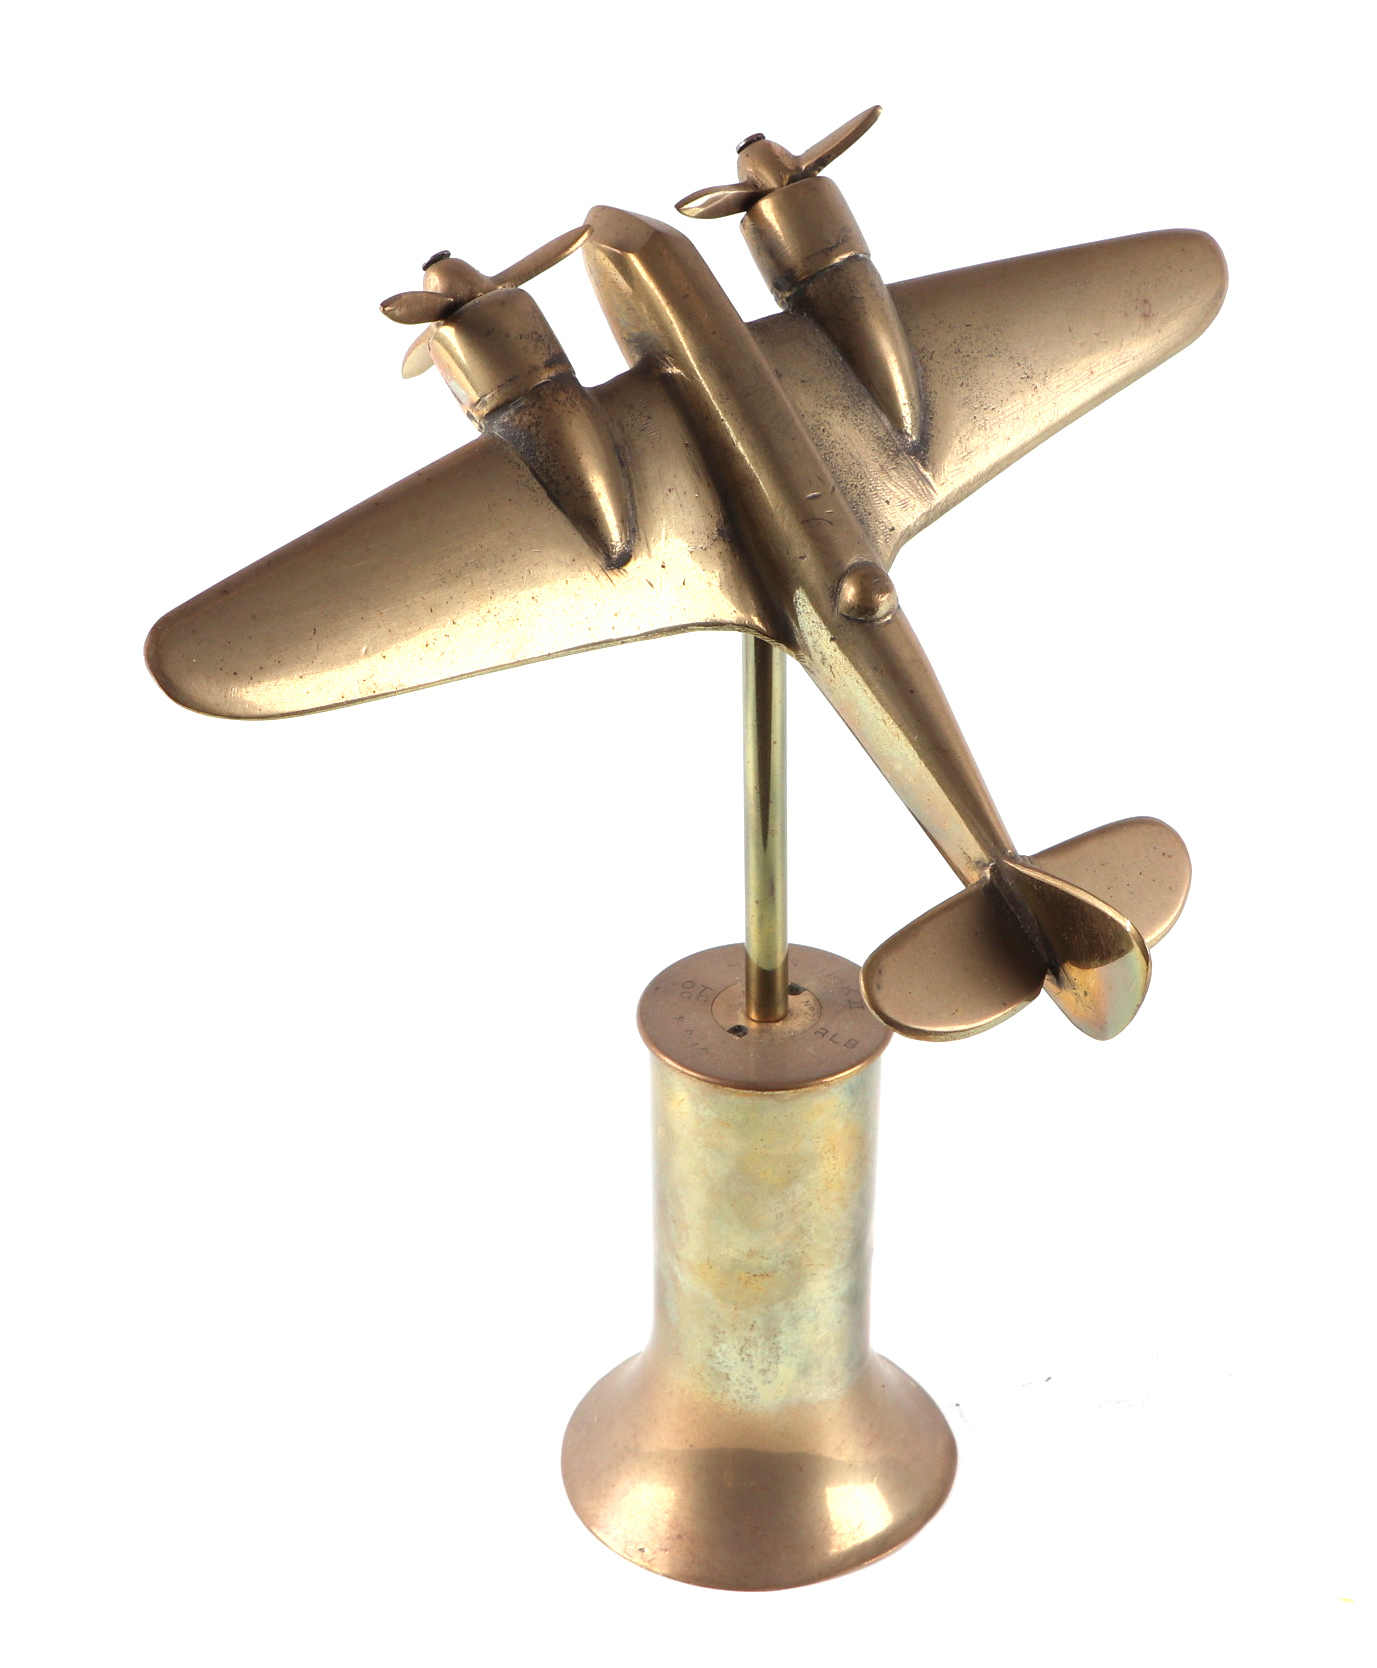 A trench art cast brass model of a Sterling bomber, mounted on a brass plinth, wingspan 23cm. - Image 2 of 2